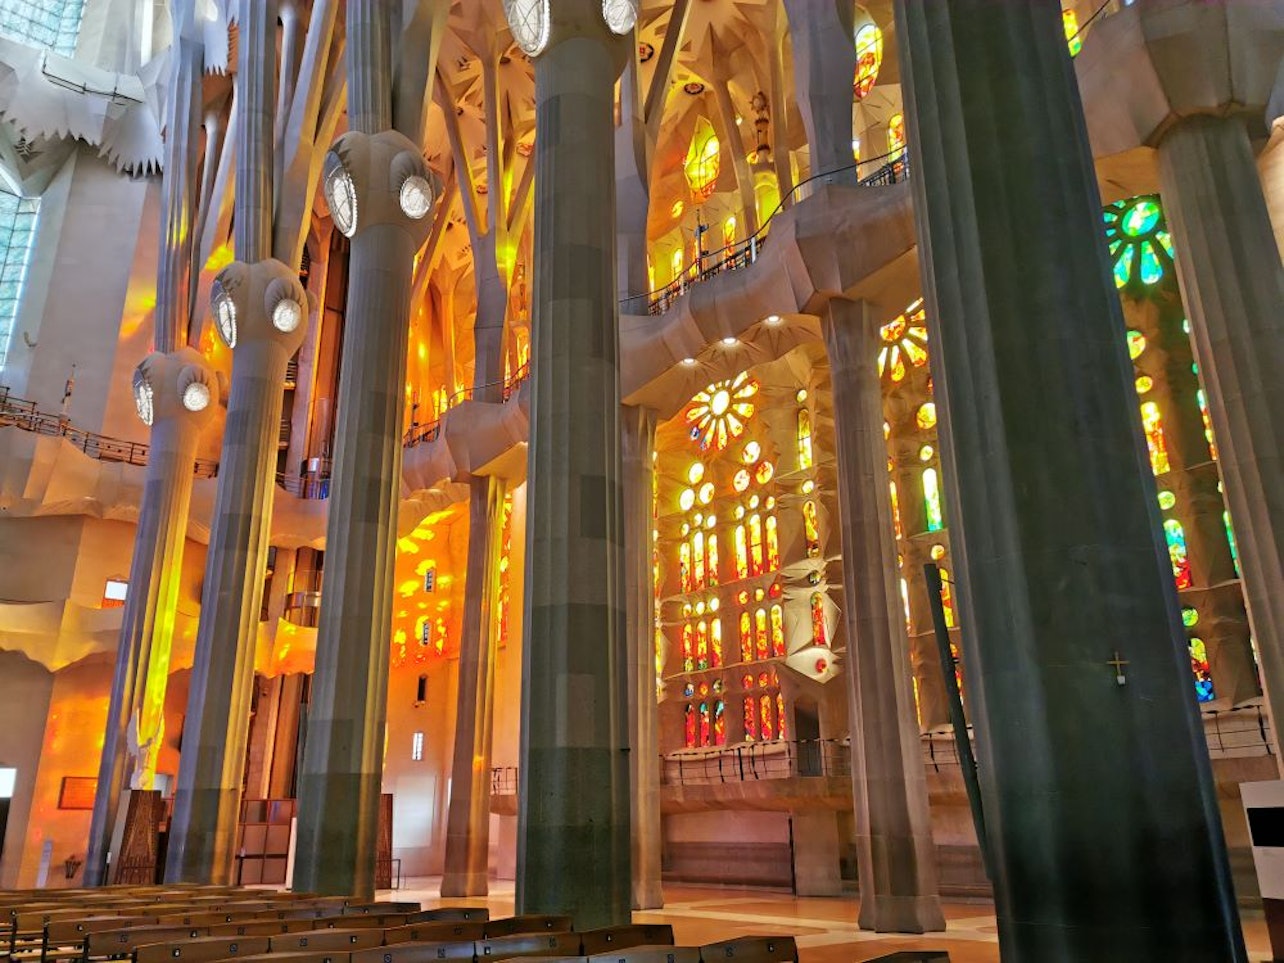 Go With A Local: Skip-The-Line Sagrada Família Tour in Italian - Accommodations in Barcelona